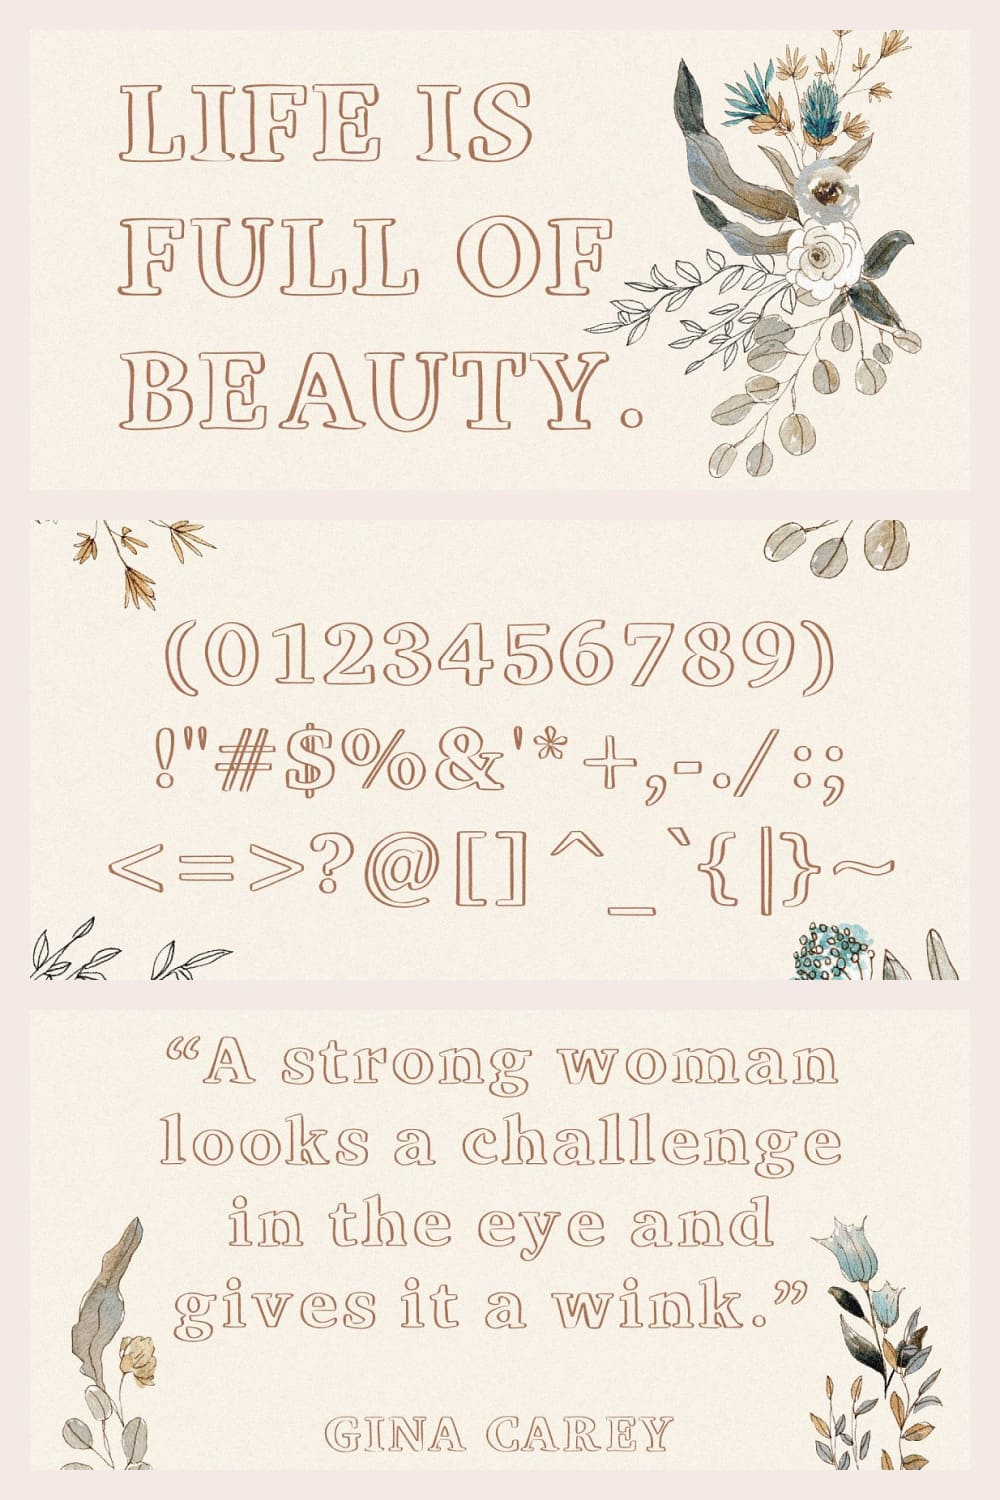 Viktoria - Outline Serif Typeface Preview With Symbols -"A Strong Woman Looks A Challenge In The Eye And Gives It A Wink".